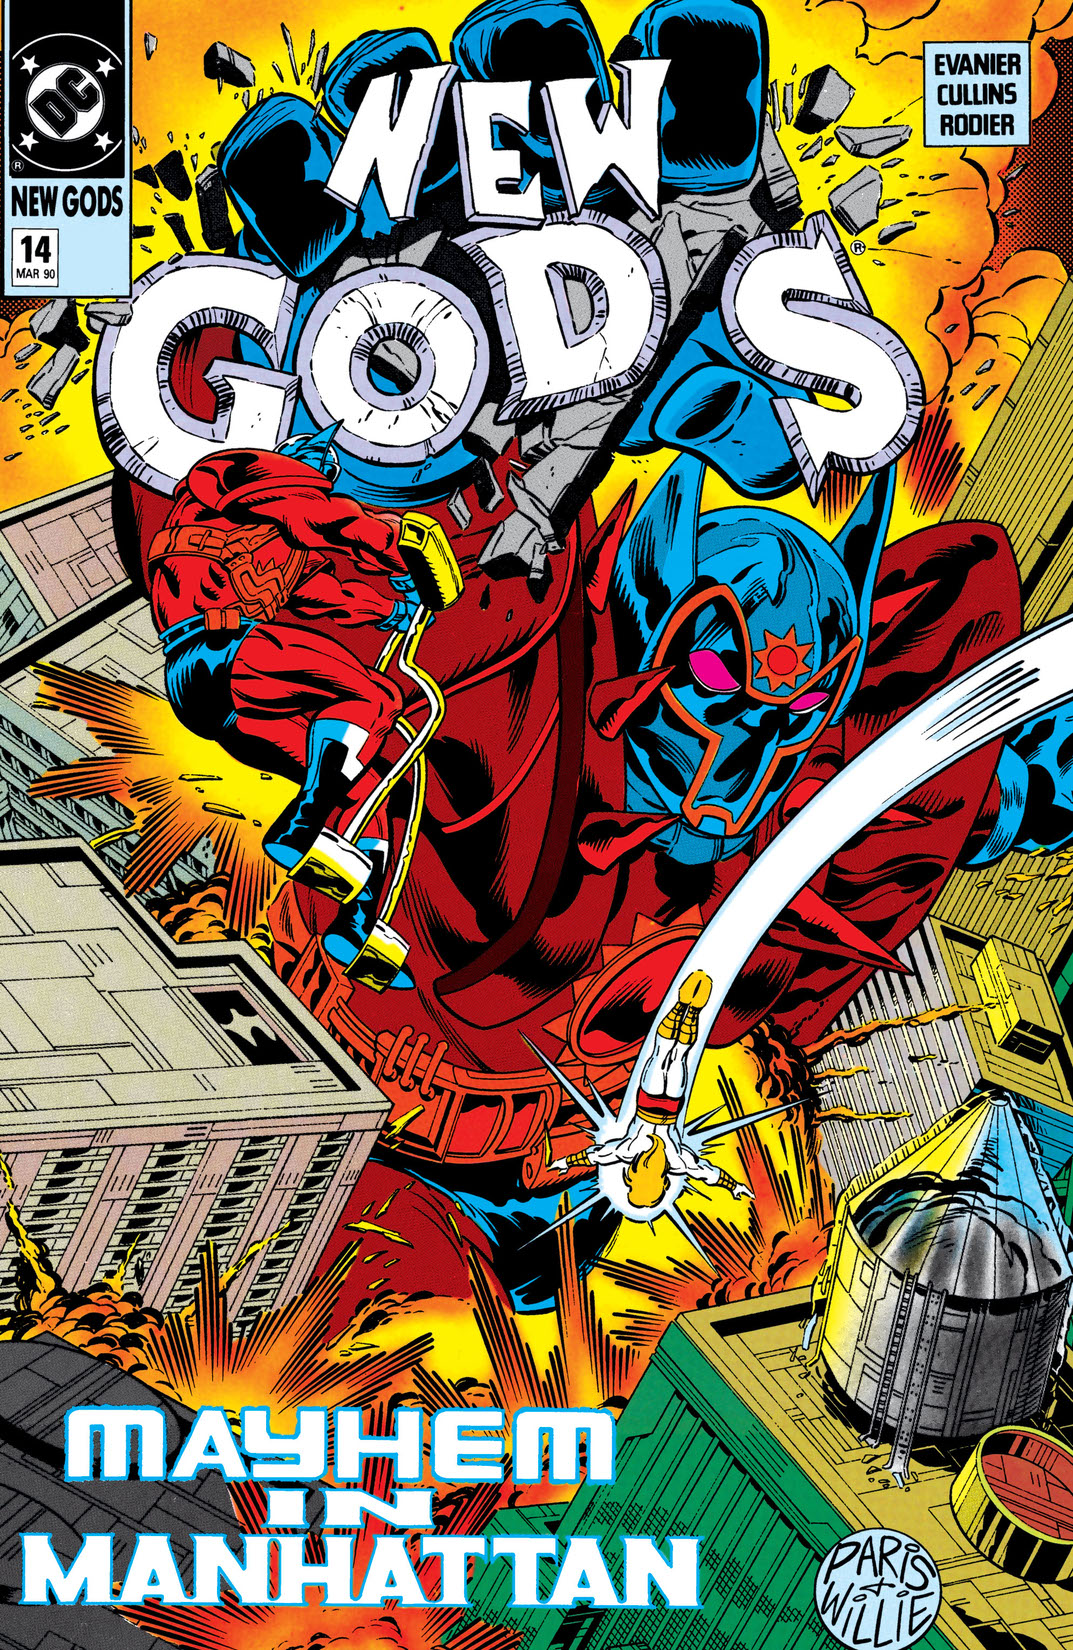 New Gods (1989-) #14 preview images